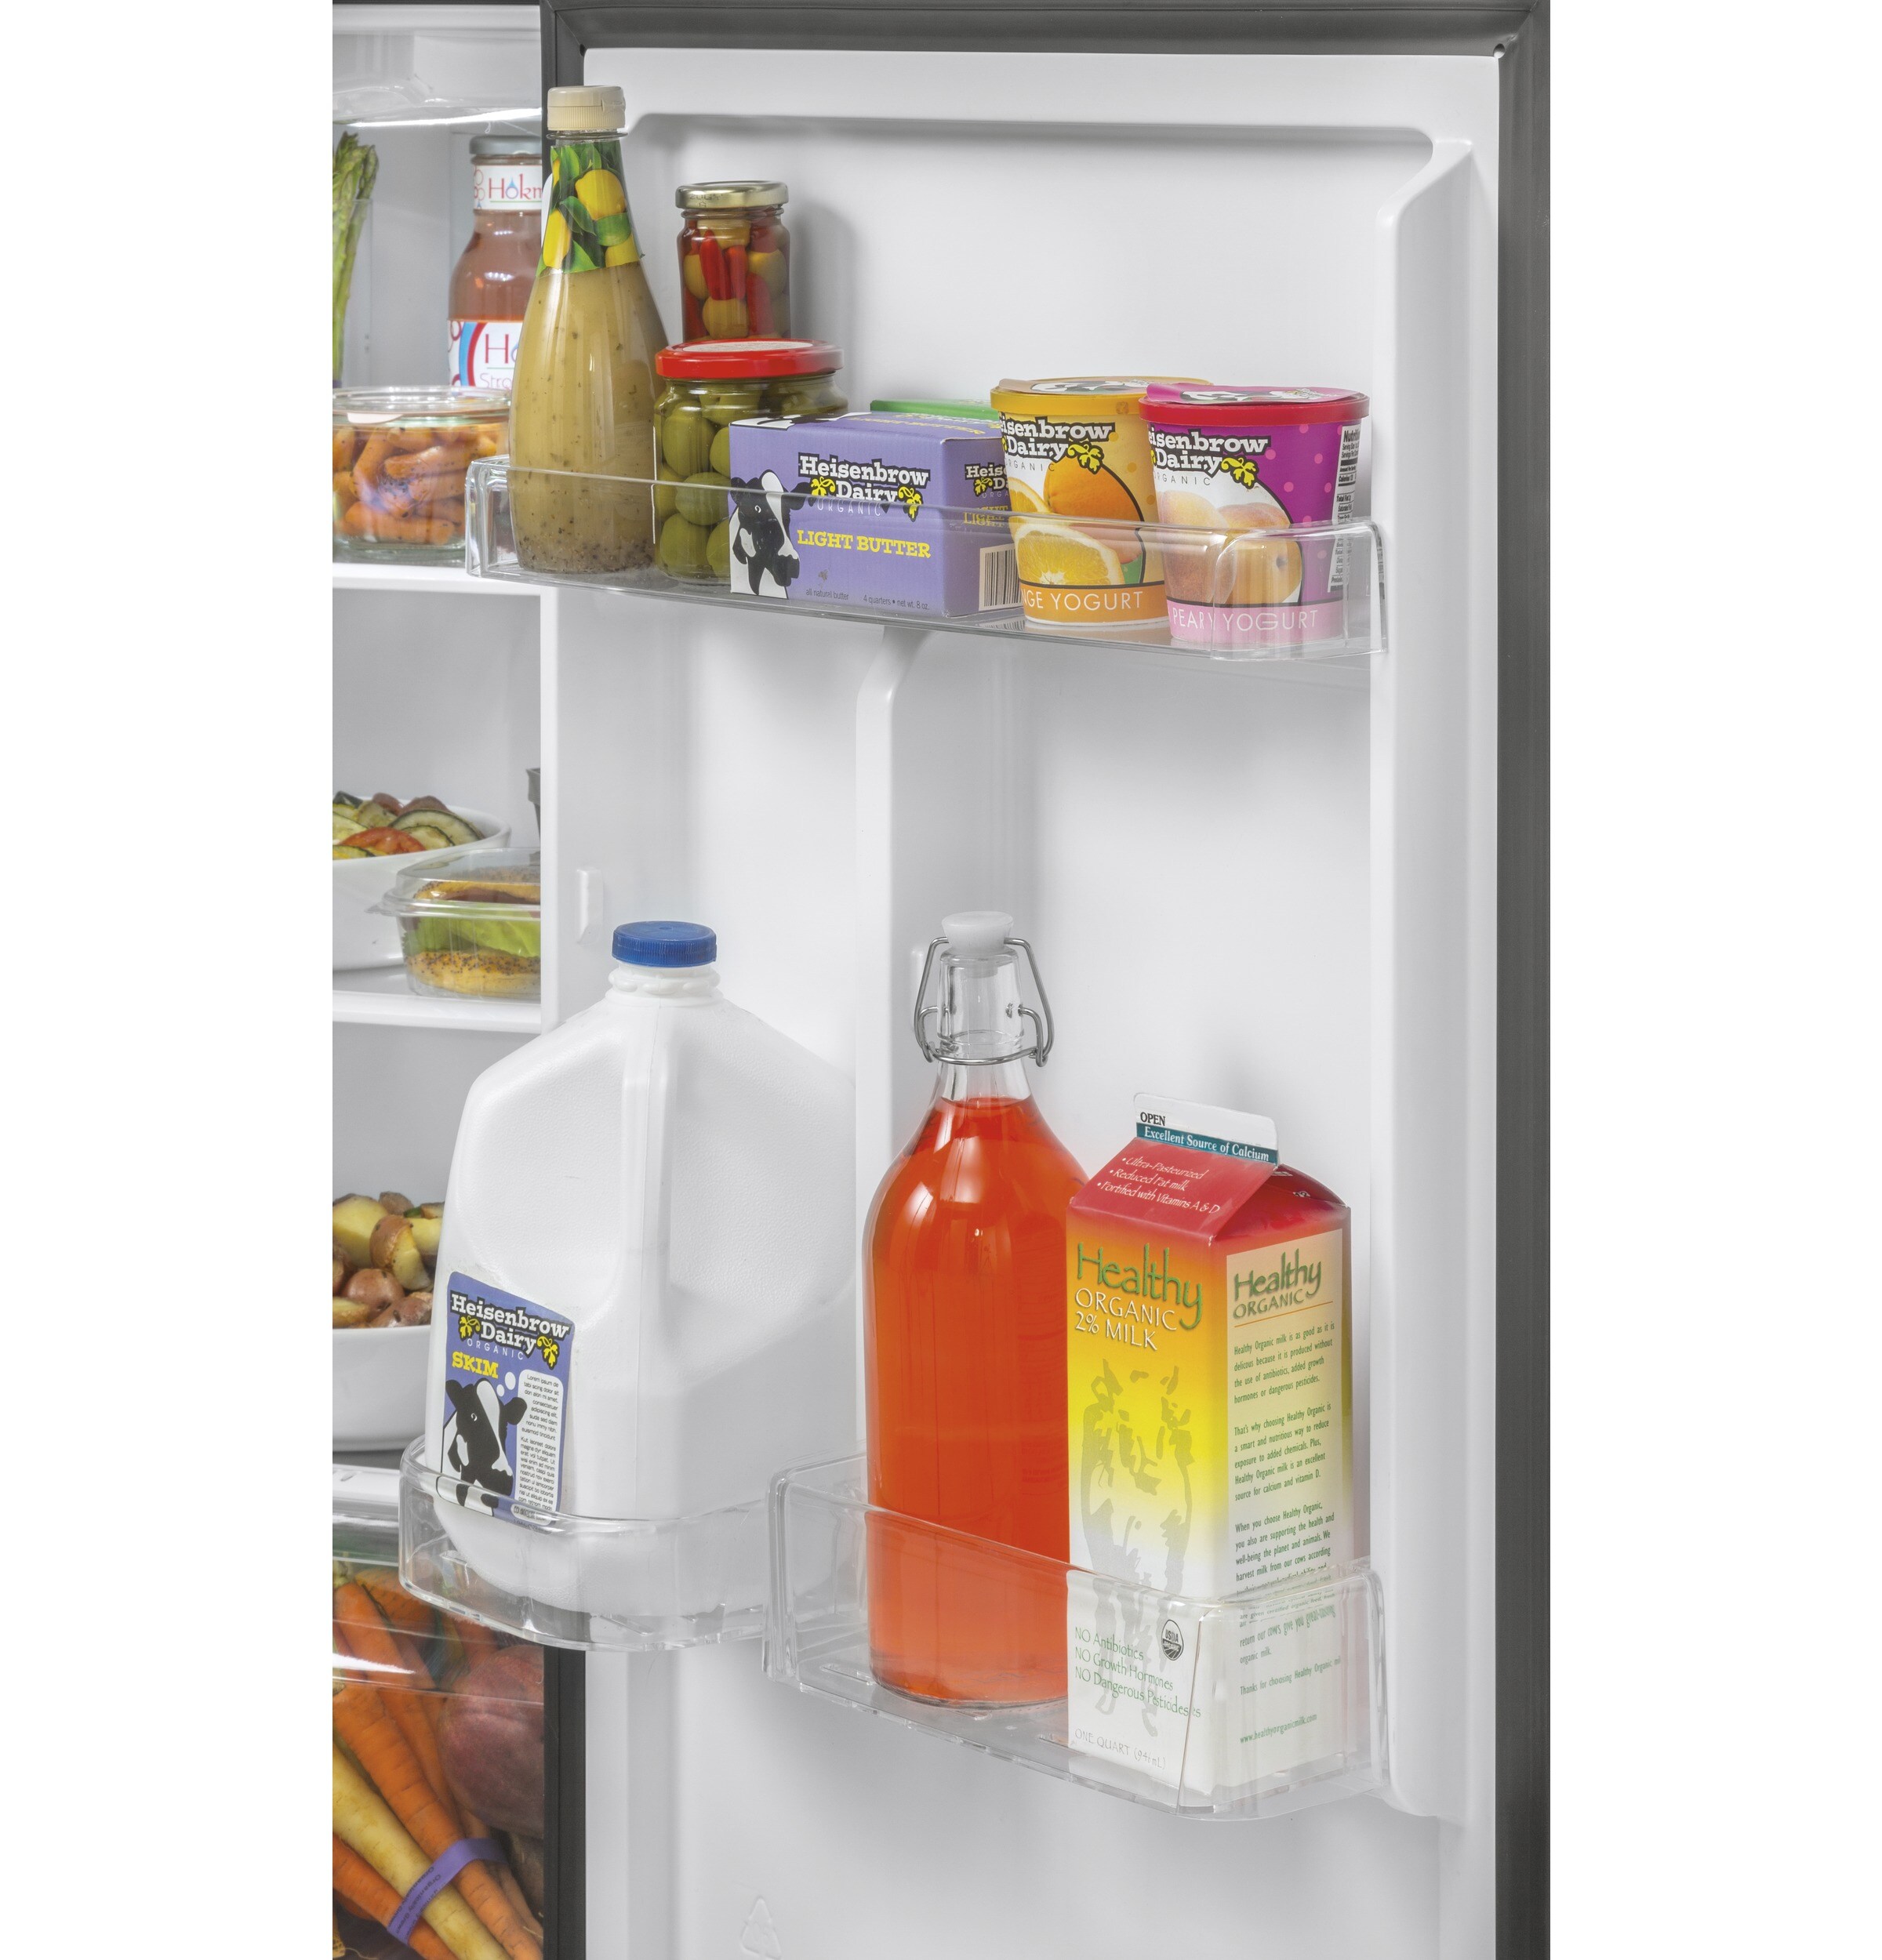 Haier 9.8-cu ft Top-Freezer Refrigerator (White) in the Top 